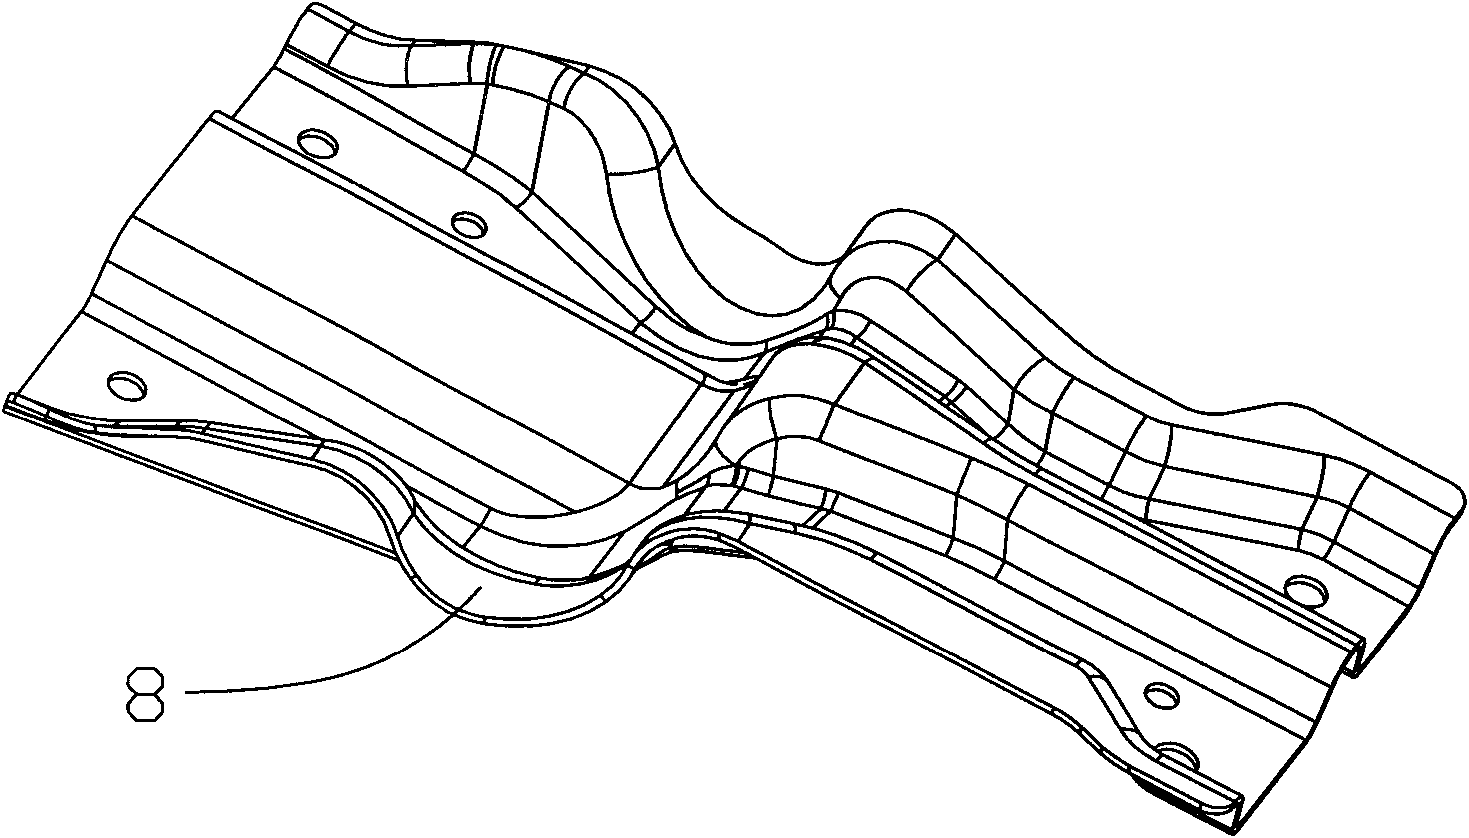 Connecting bracket assembly of steering support and front wall panel